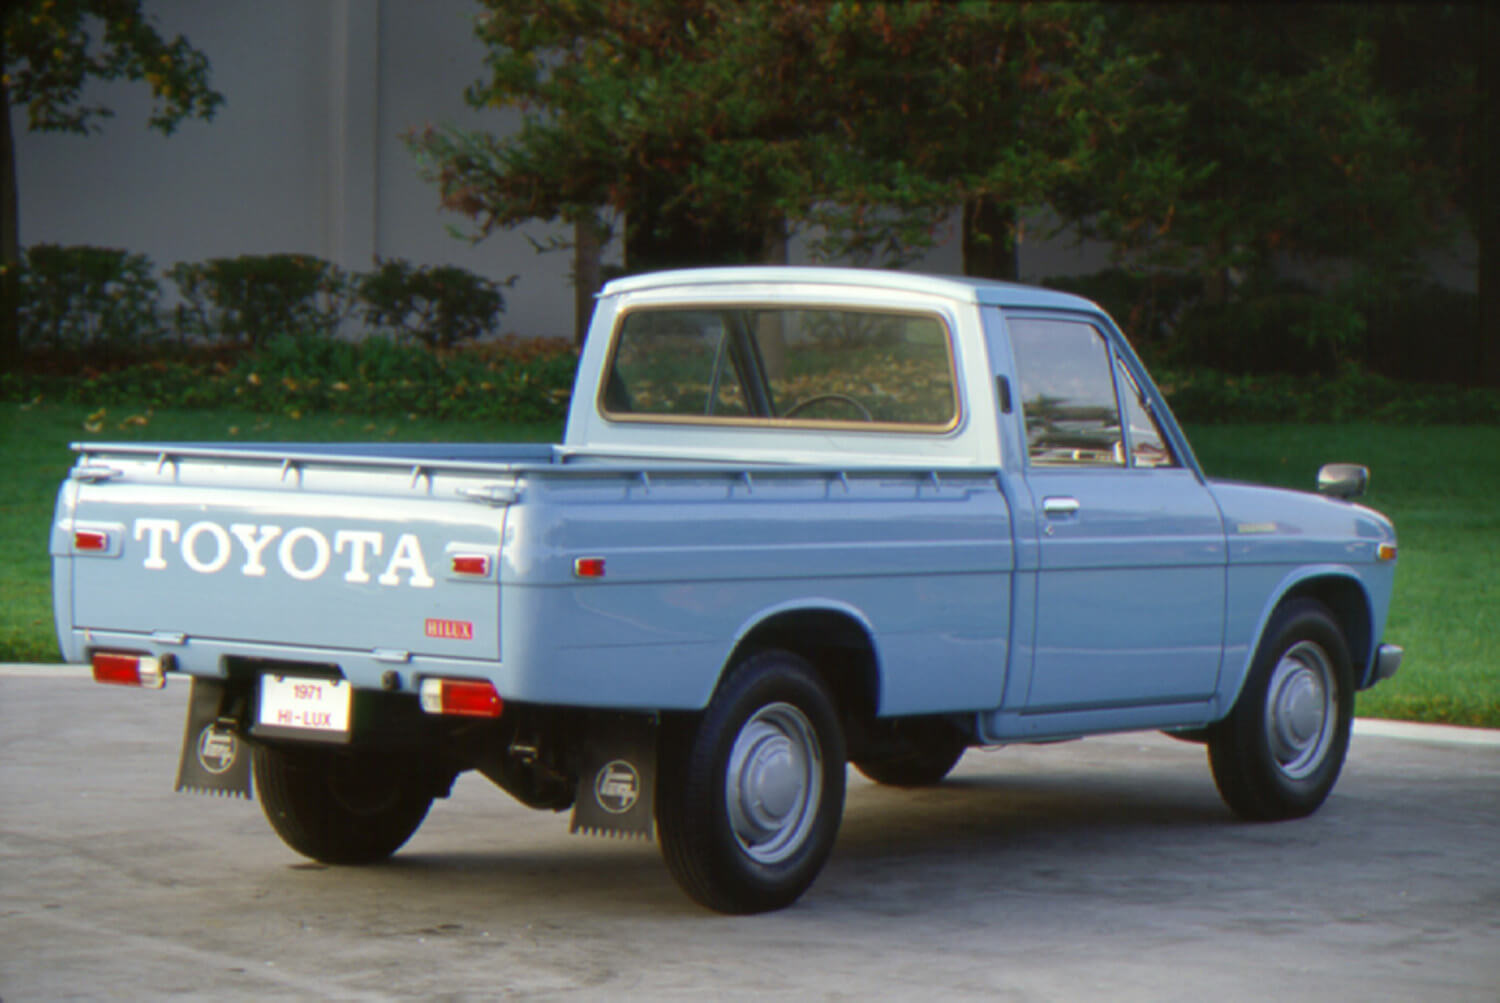 The tailgate and bed of a blue Toyota hi-lux pickup truck, trees visible in the background.